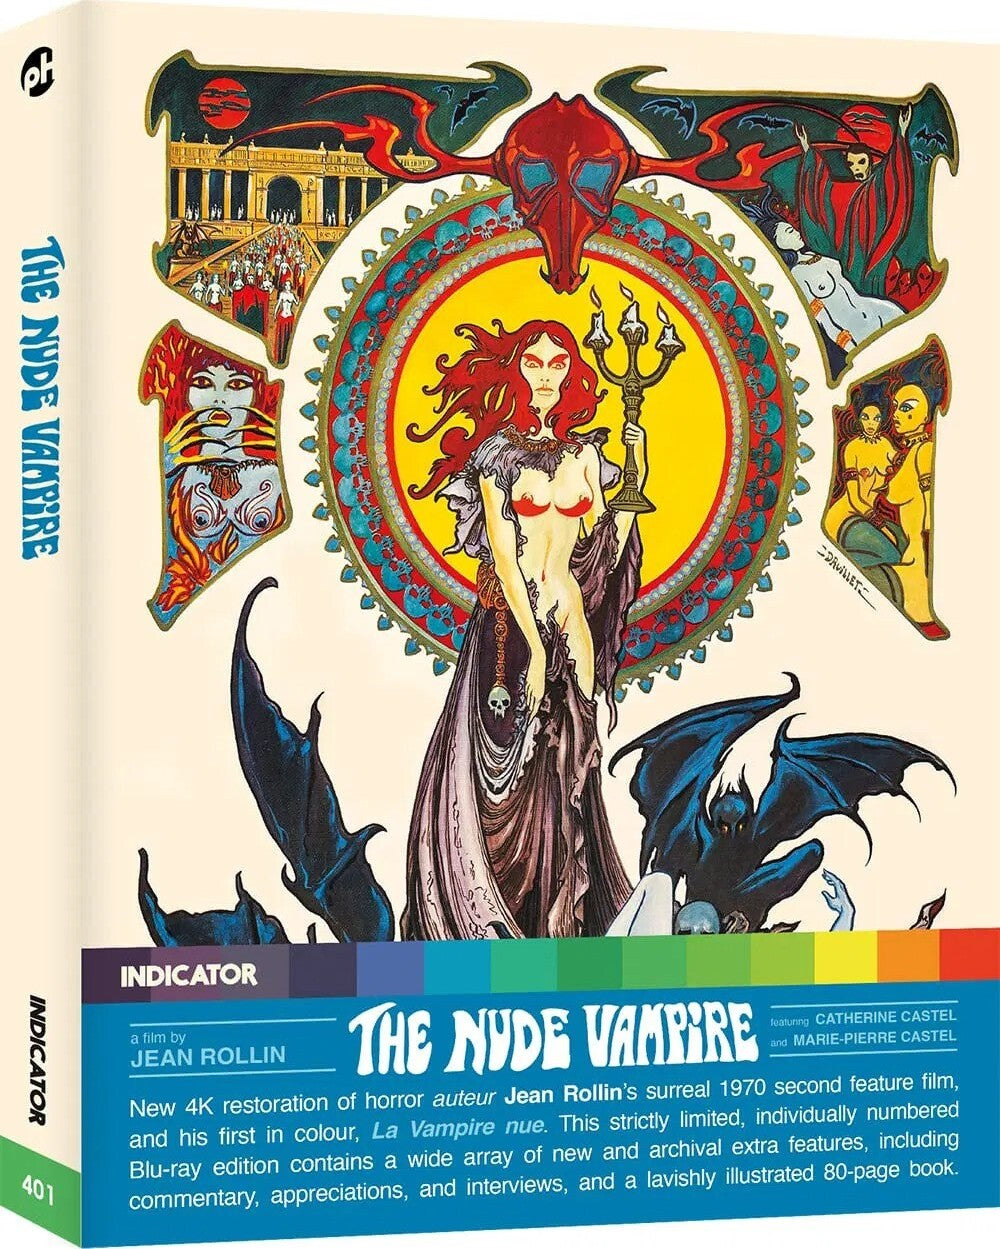 THE NUDE VAMPIRE (LIMITED EDITION) BLU-RAY [SCRATCH AND DENT]